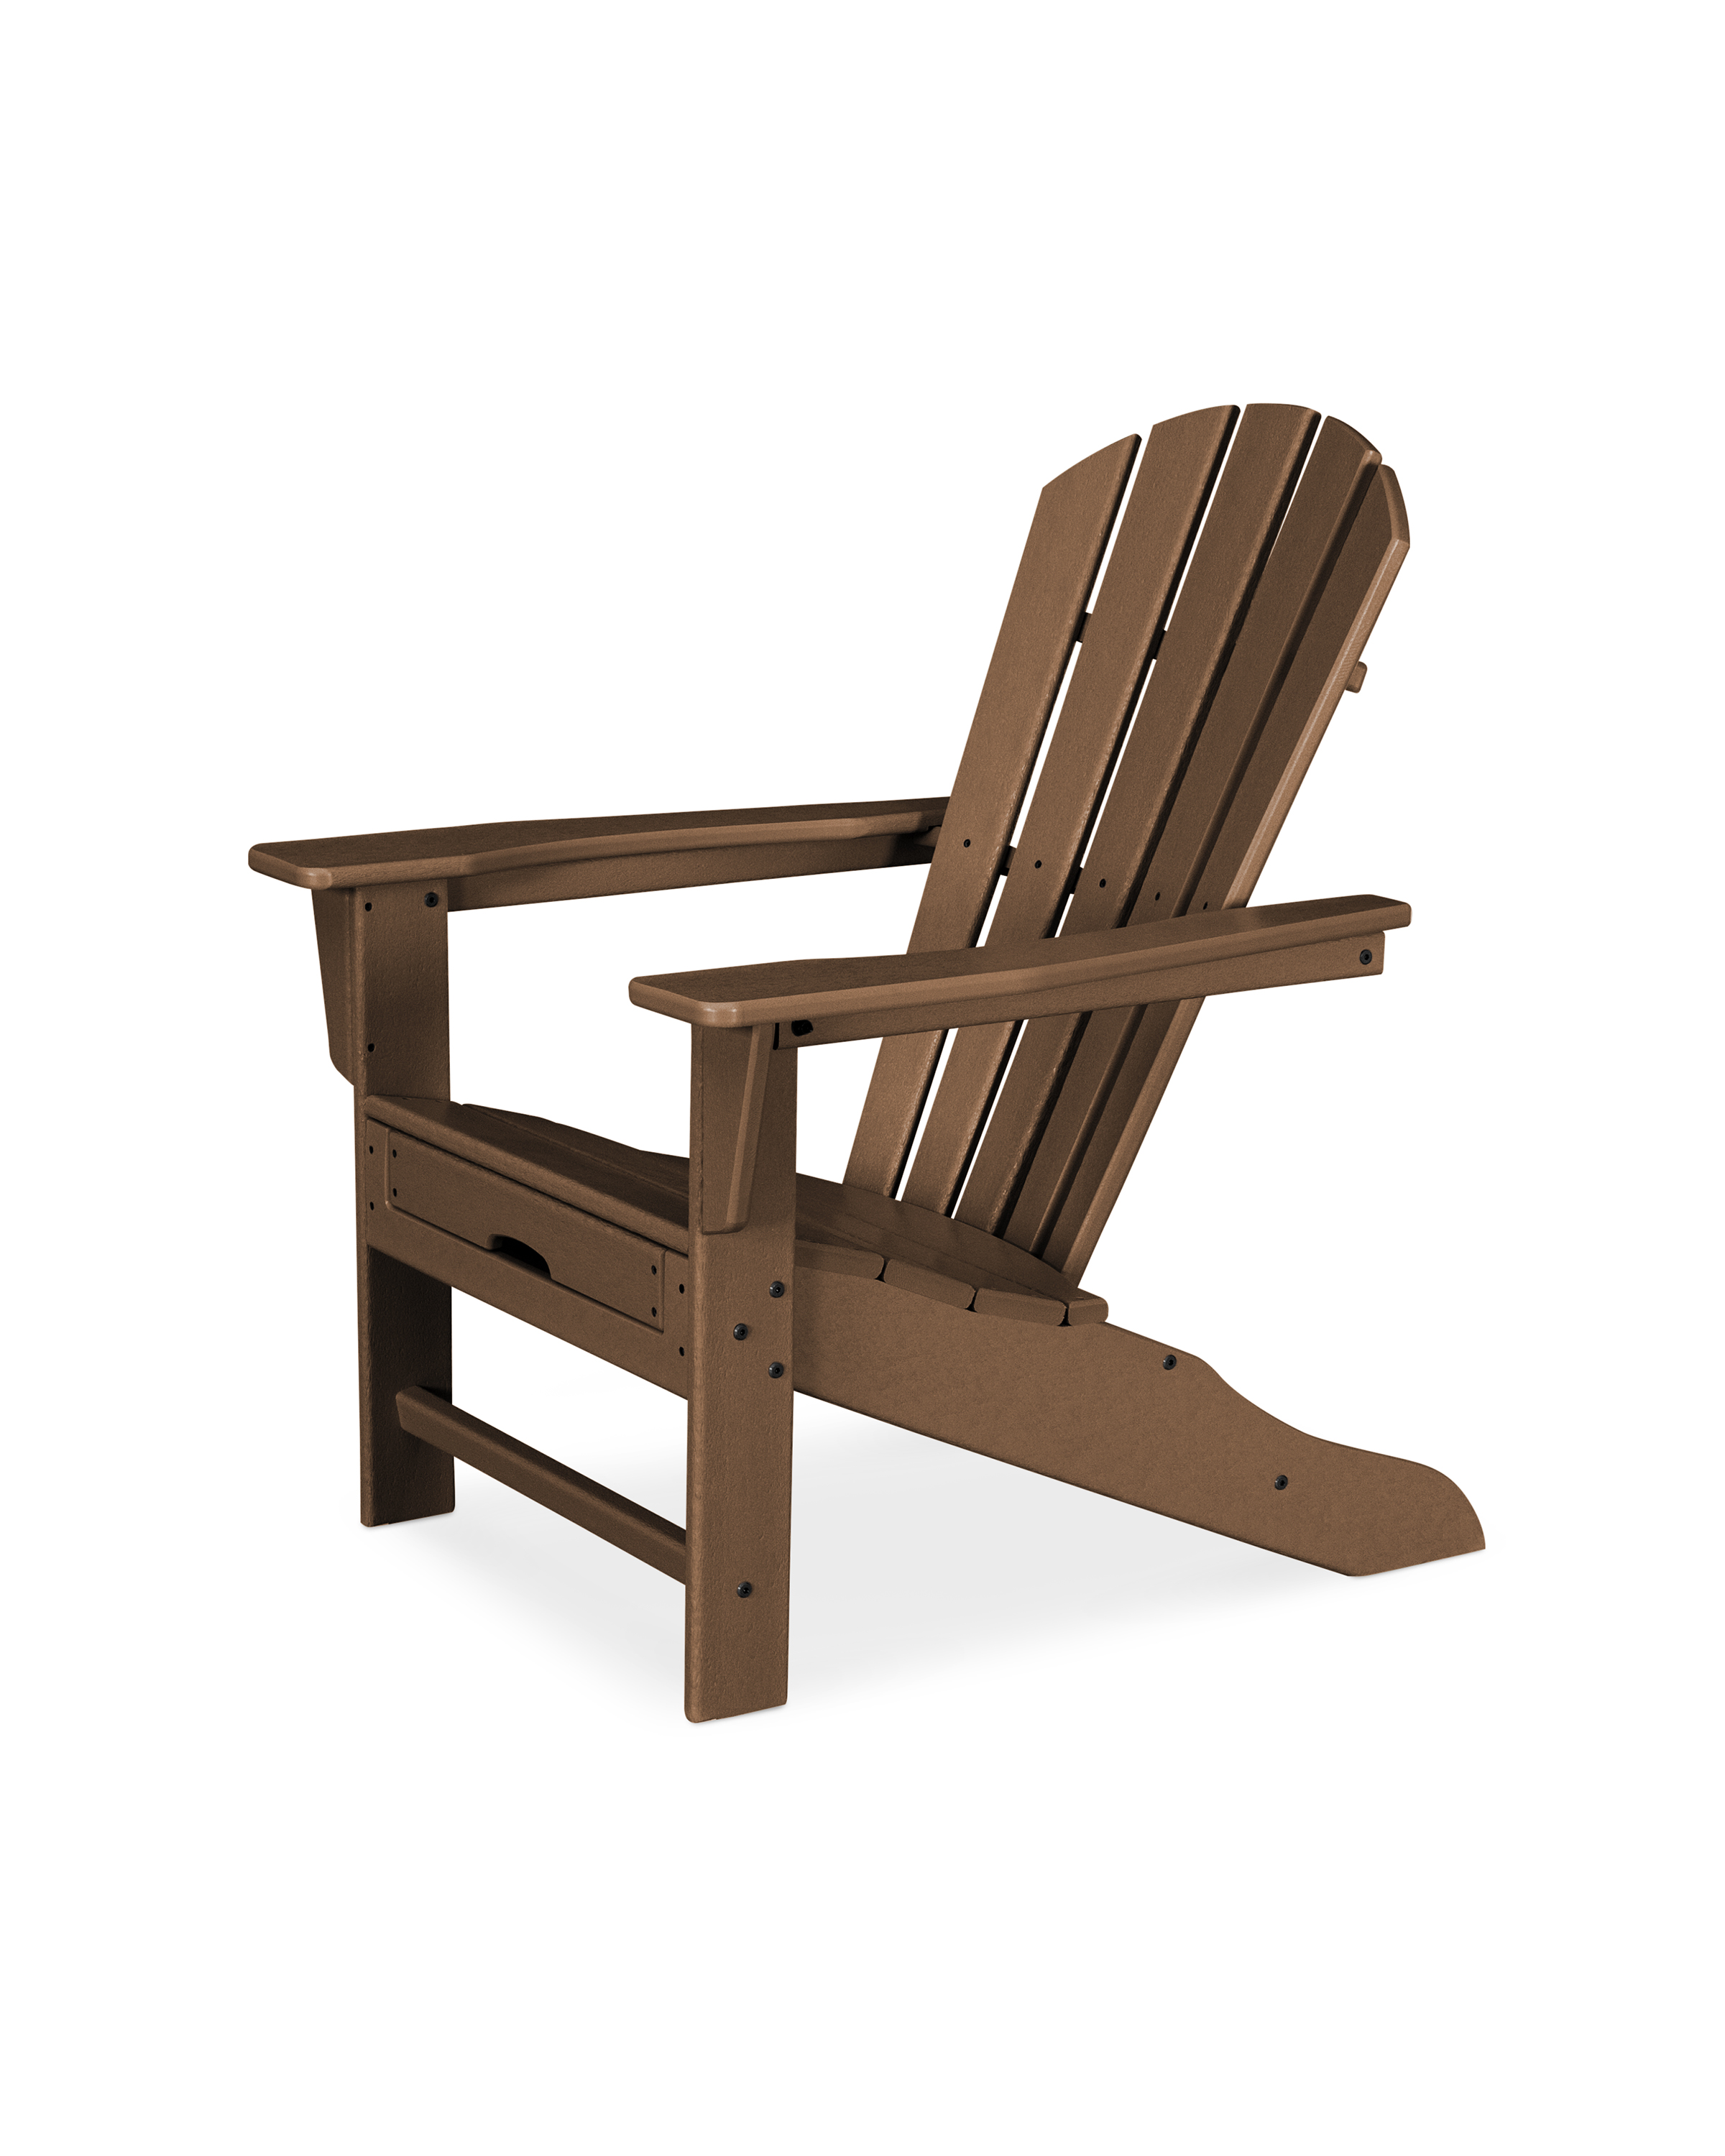 palm coast ultimate adirondack with hideaway ottoman in teak product image